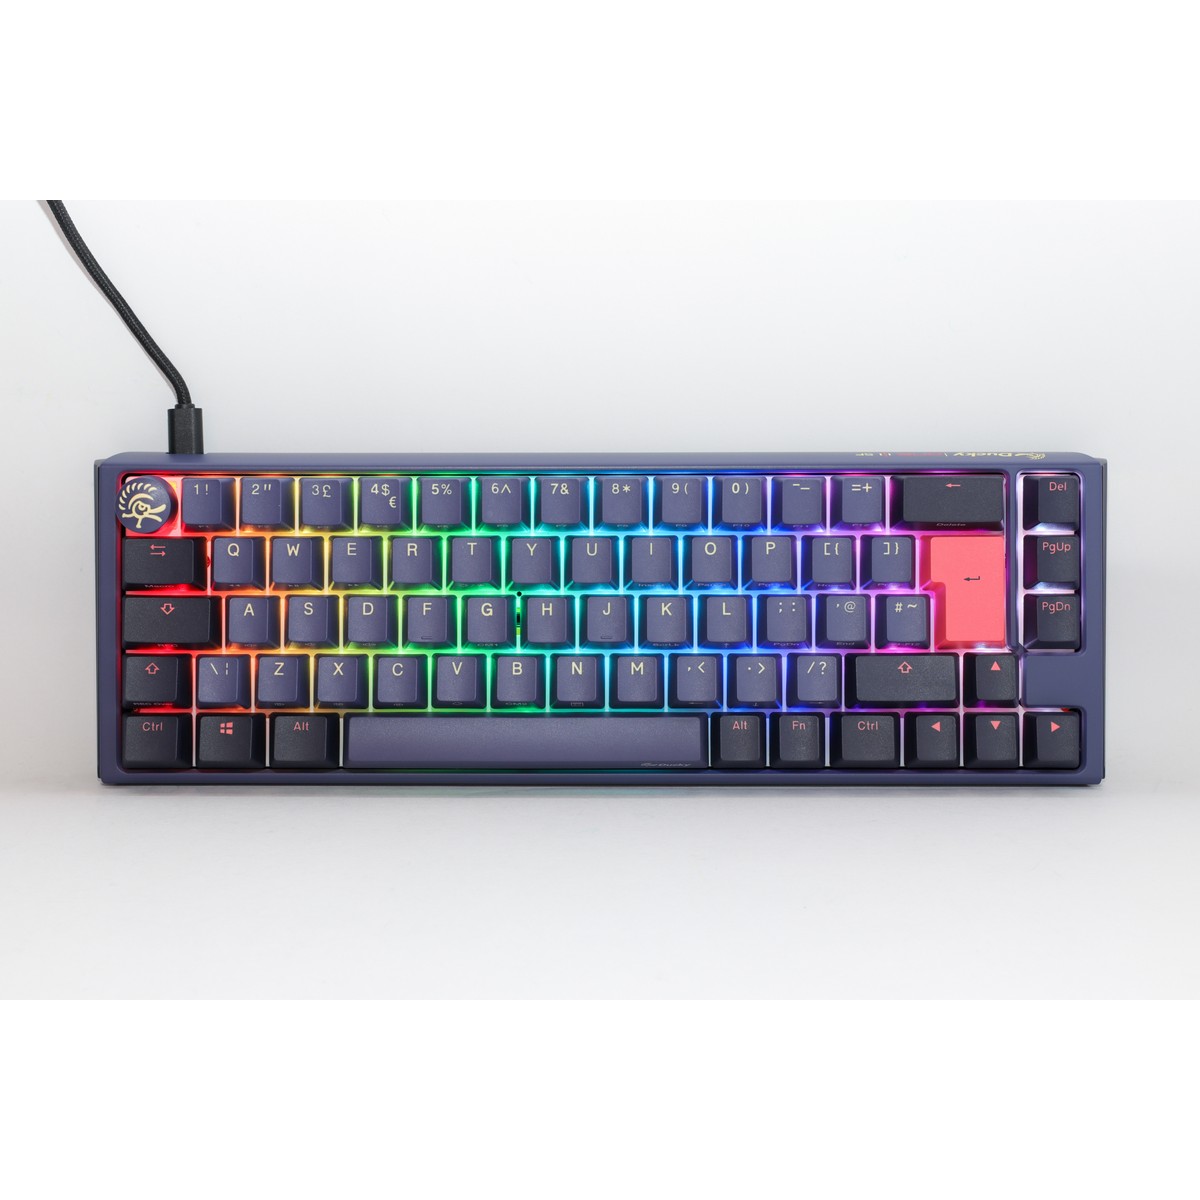 Ducky One 3 Cosmic SF 65% USB RGB Mechanical Gaming Keyboard Cherry MX Brown Switch - UK Layout